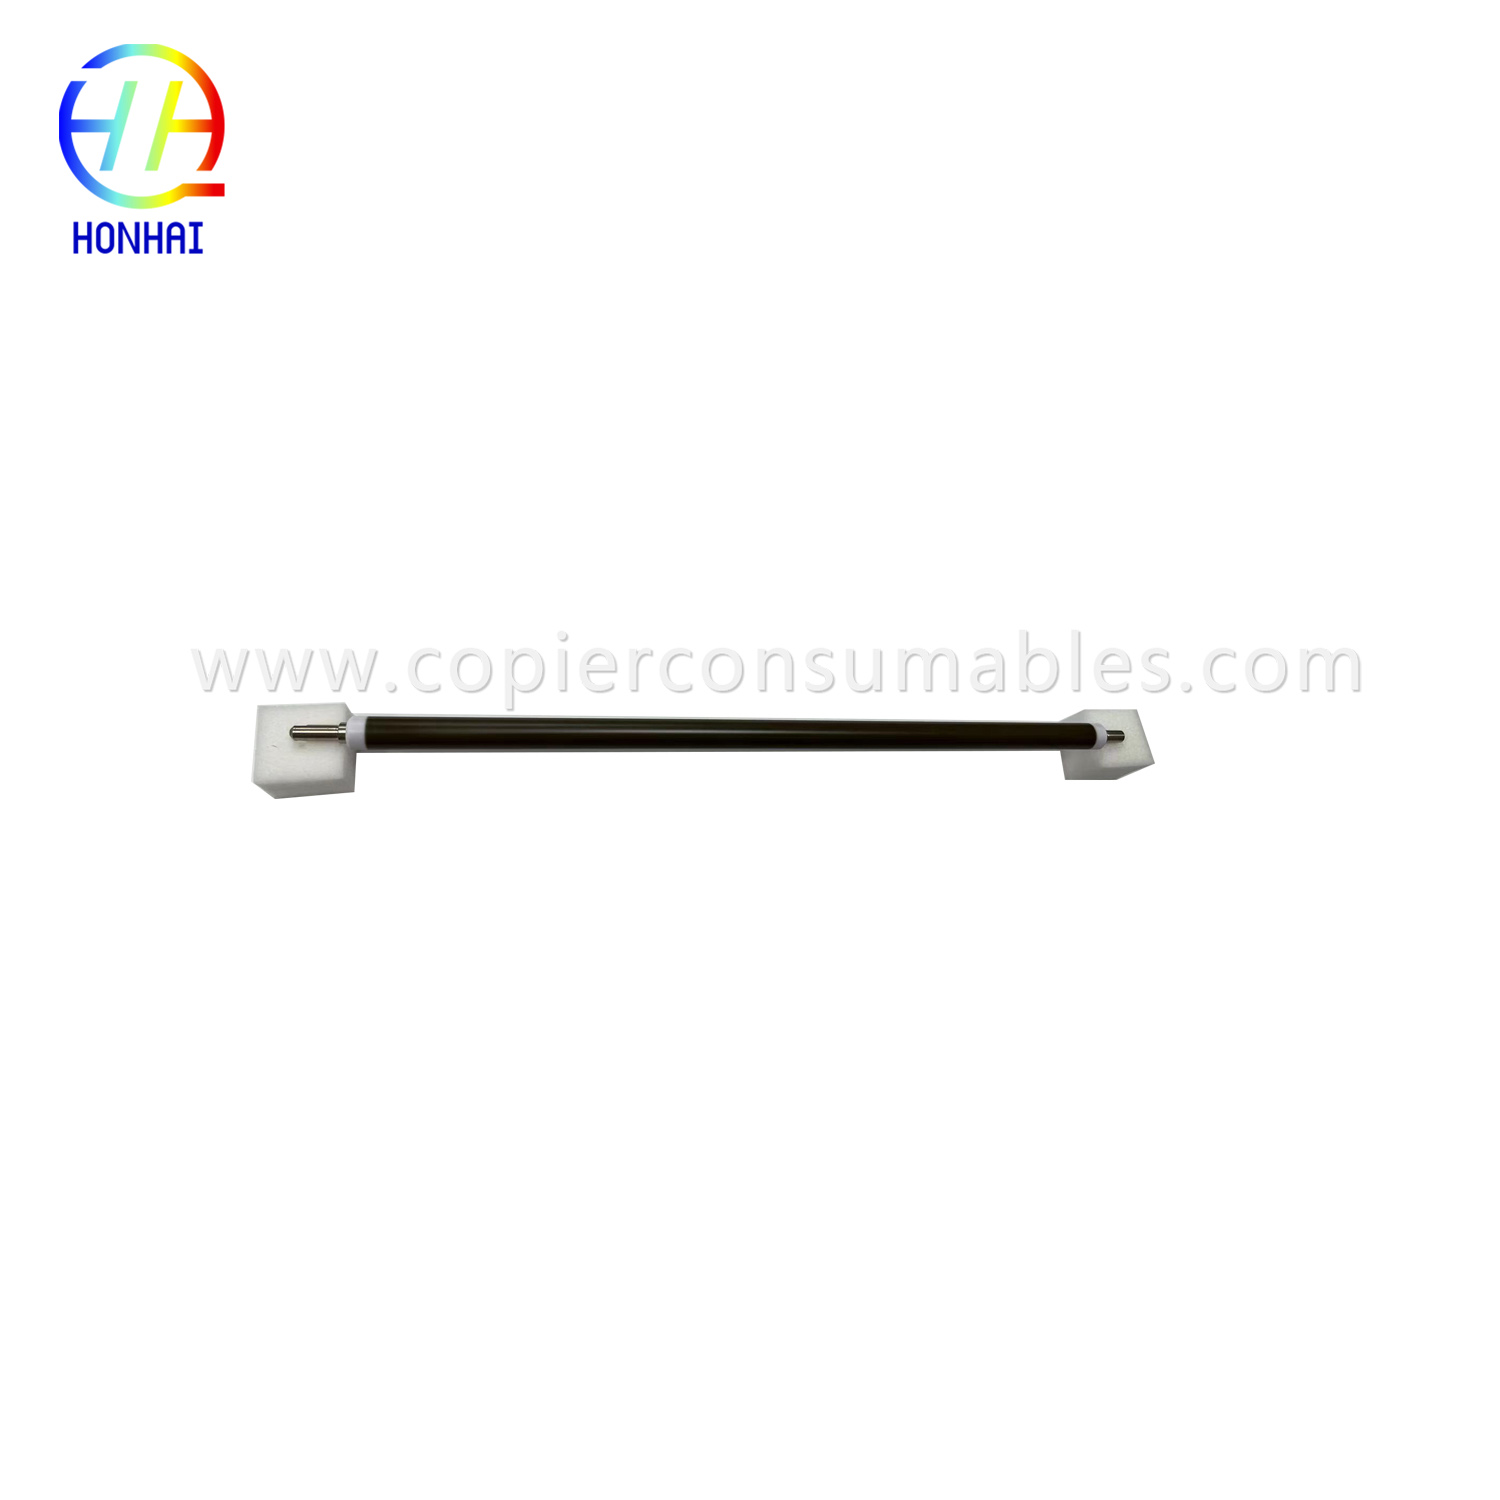 Primary Charge Roller for HP LaserJet 8000 8100 8150 (2).jpg-1 拷贝